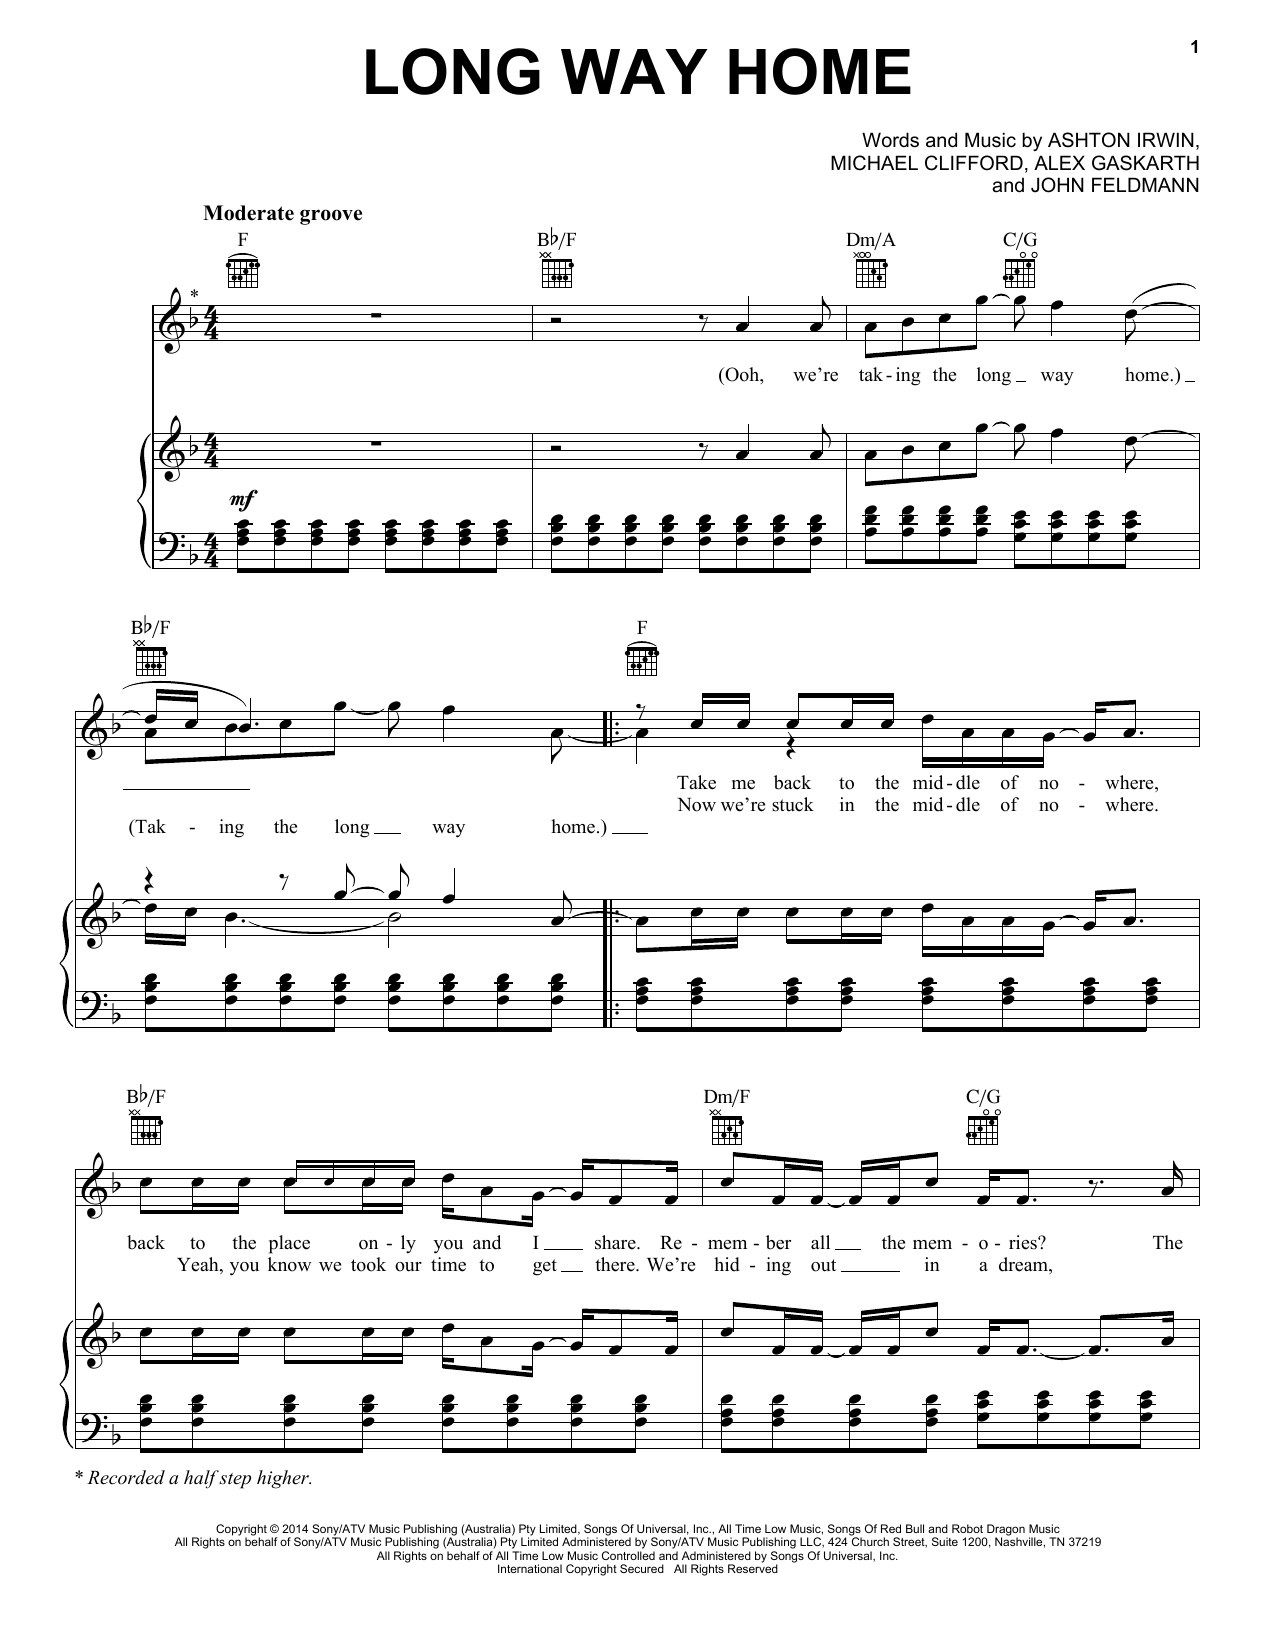 Download 5 Seconds of Summer Long Way Home Sheet Music